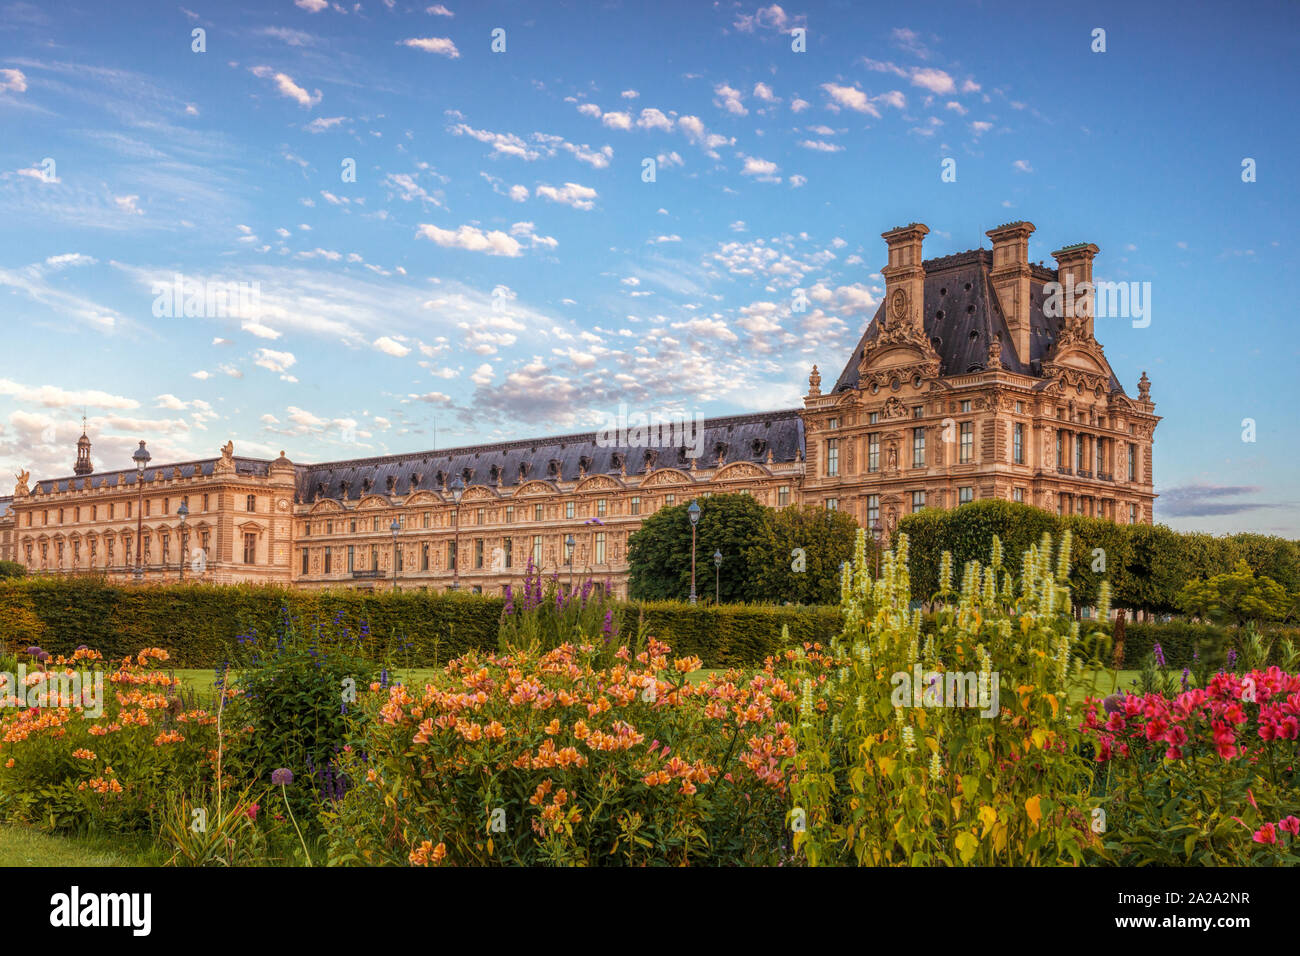 The Louvre and Tuileries garden Stock Photo